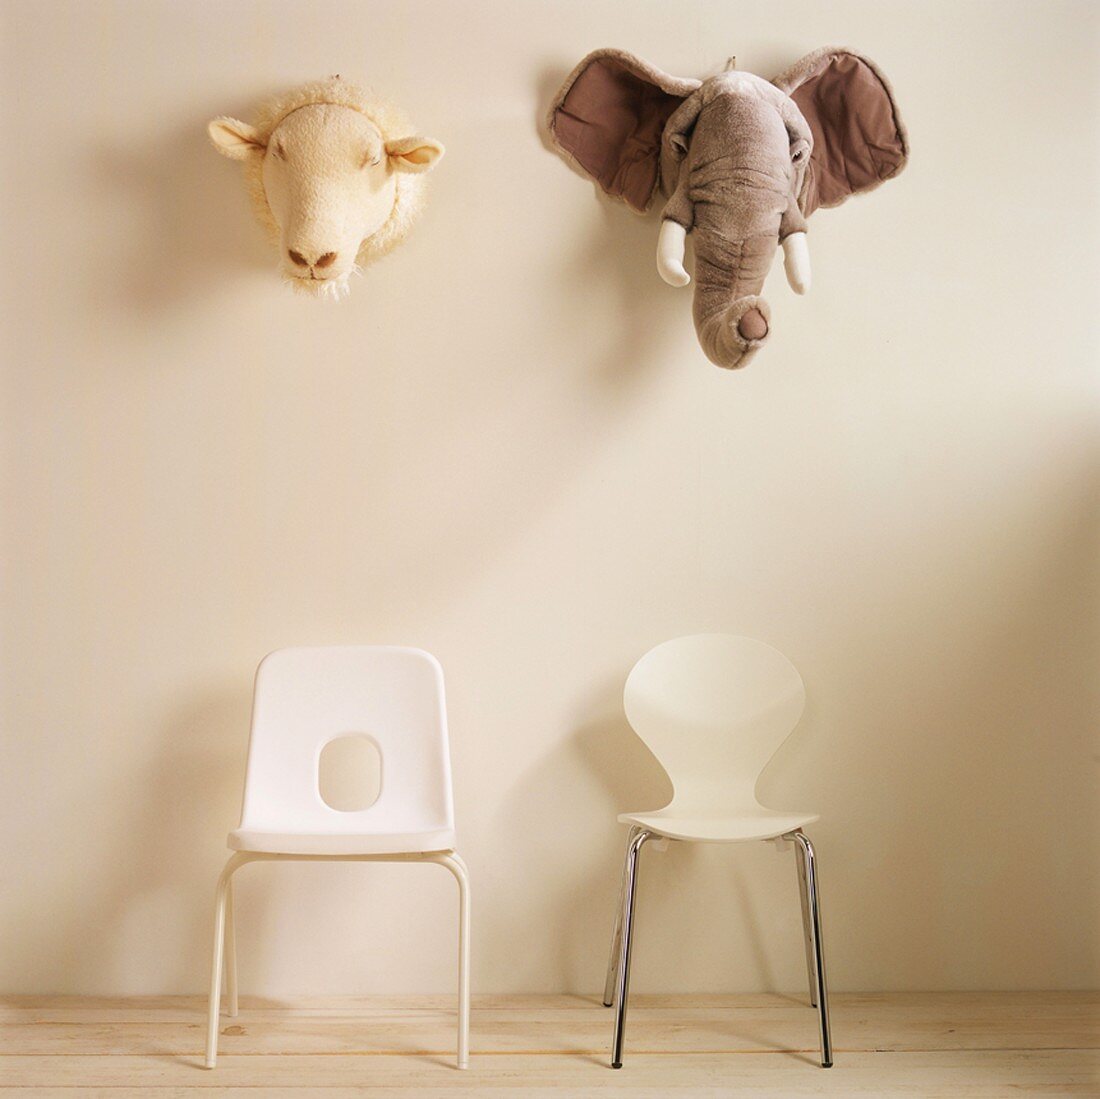 A sheep's head and an elephant's head above two chairs